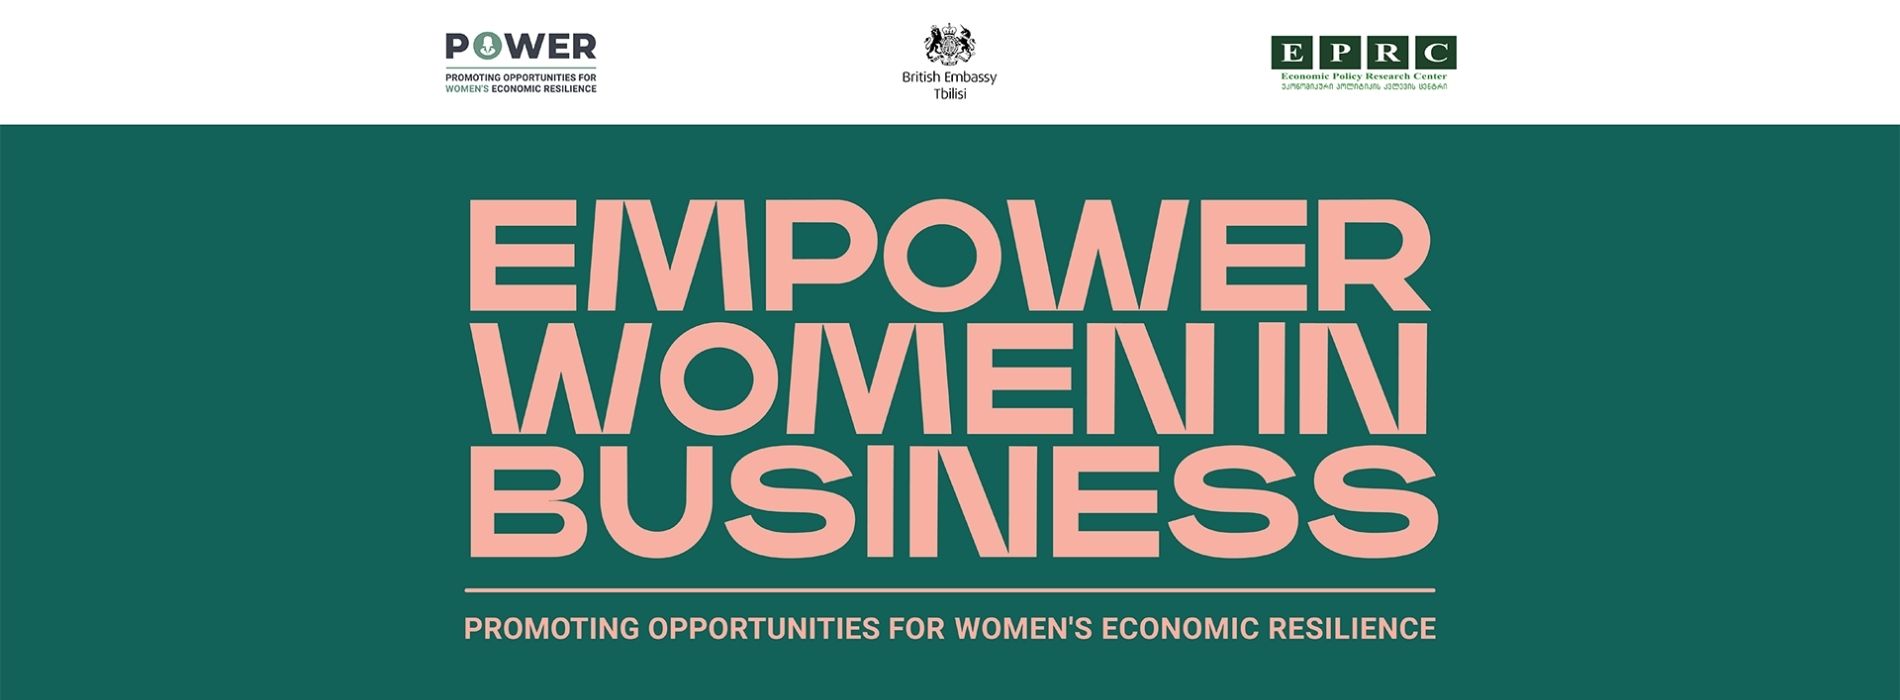 Promoting Opportunities for Women’s Economic Resilience